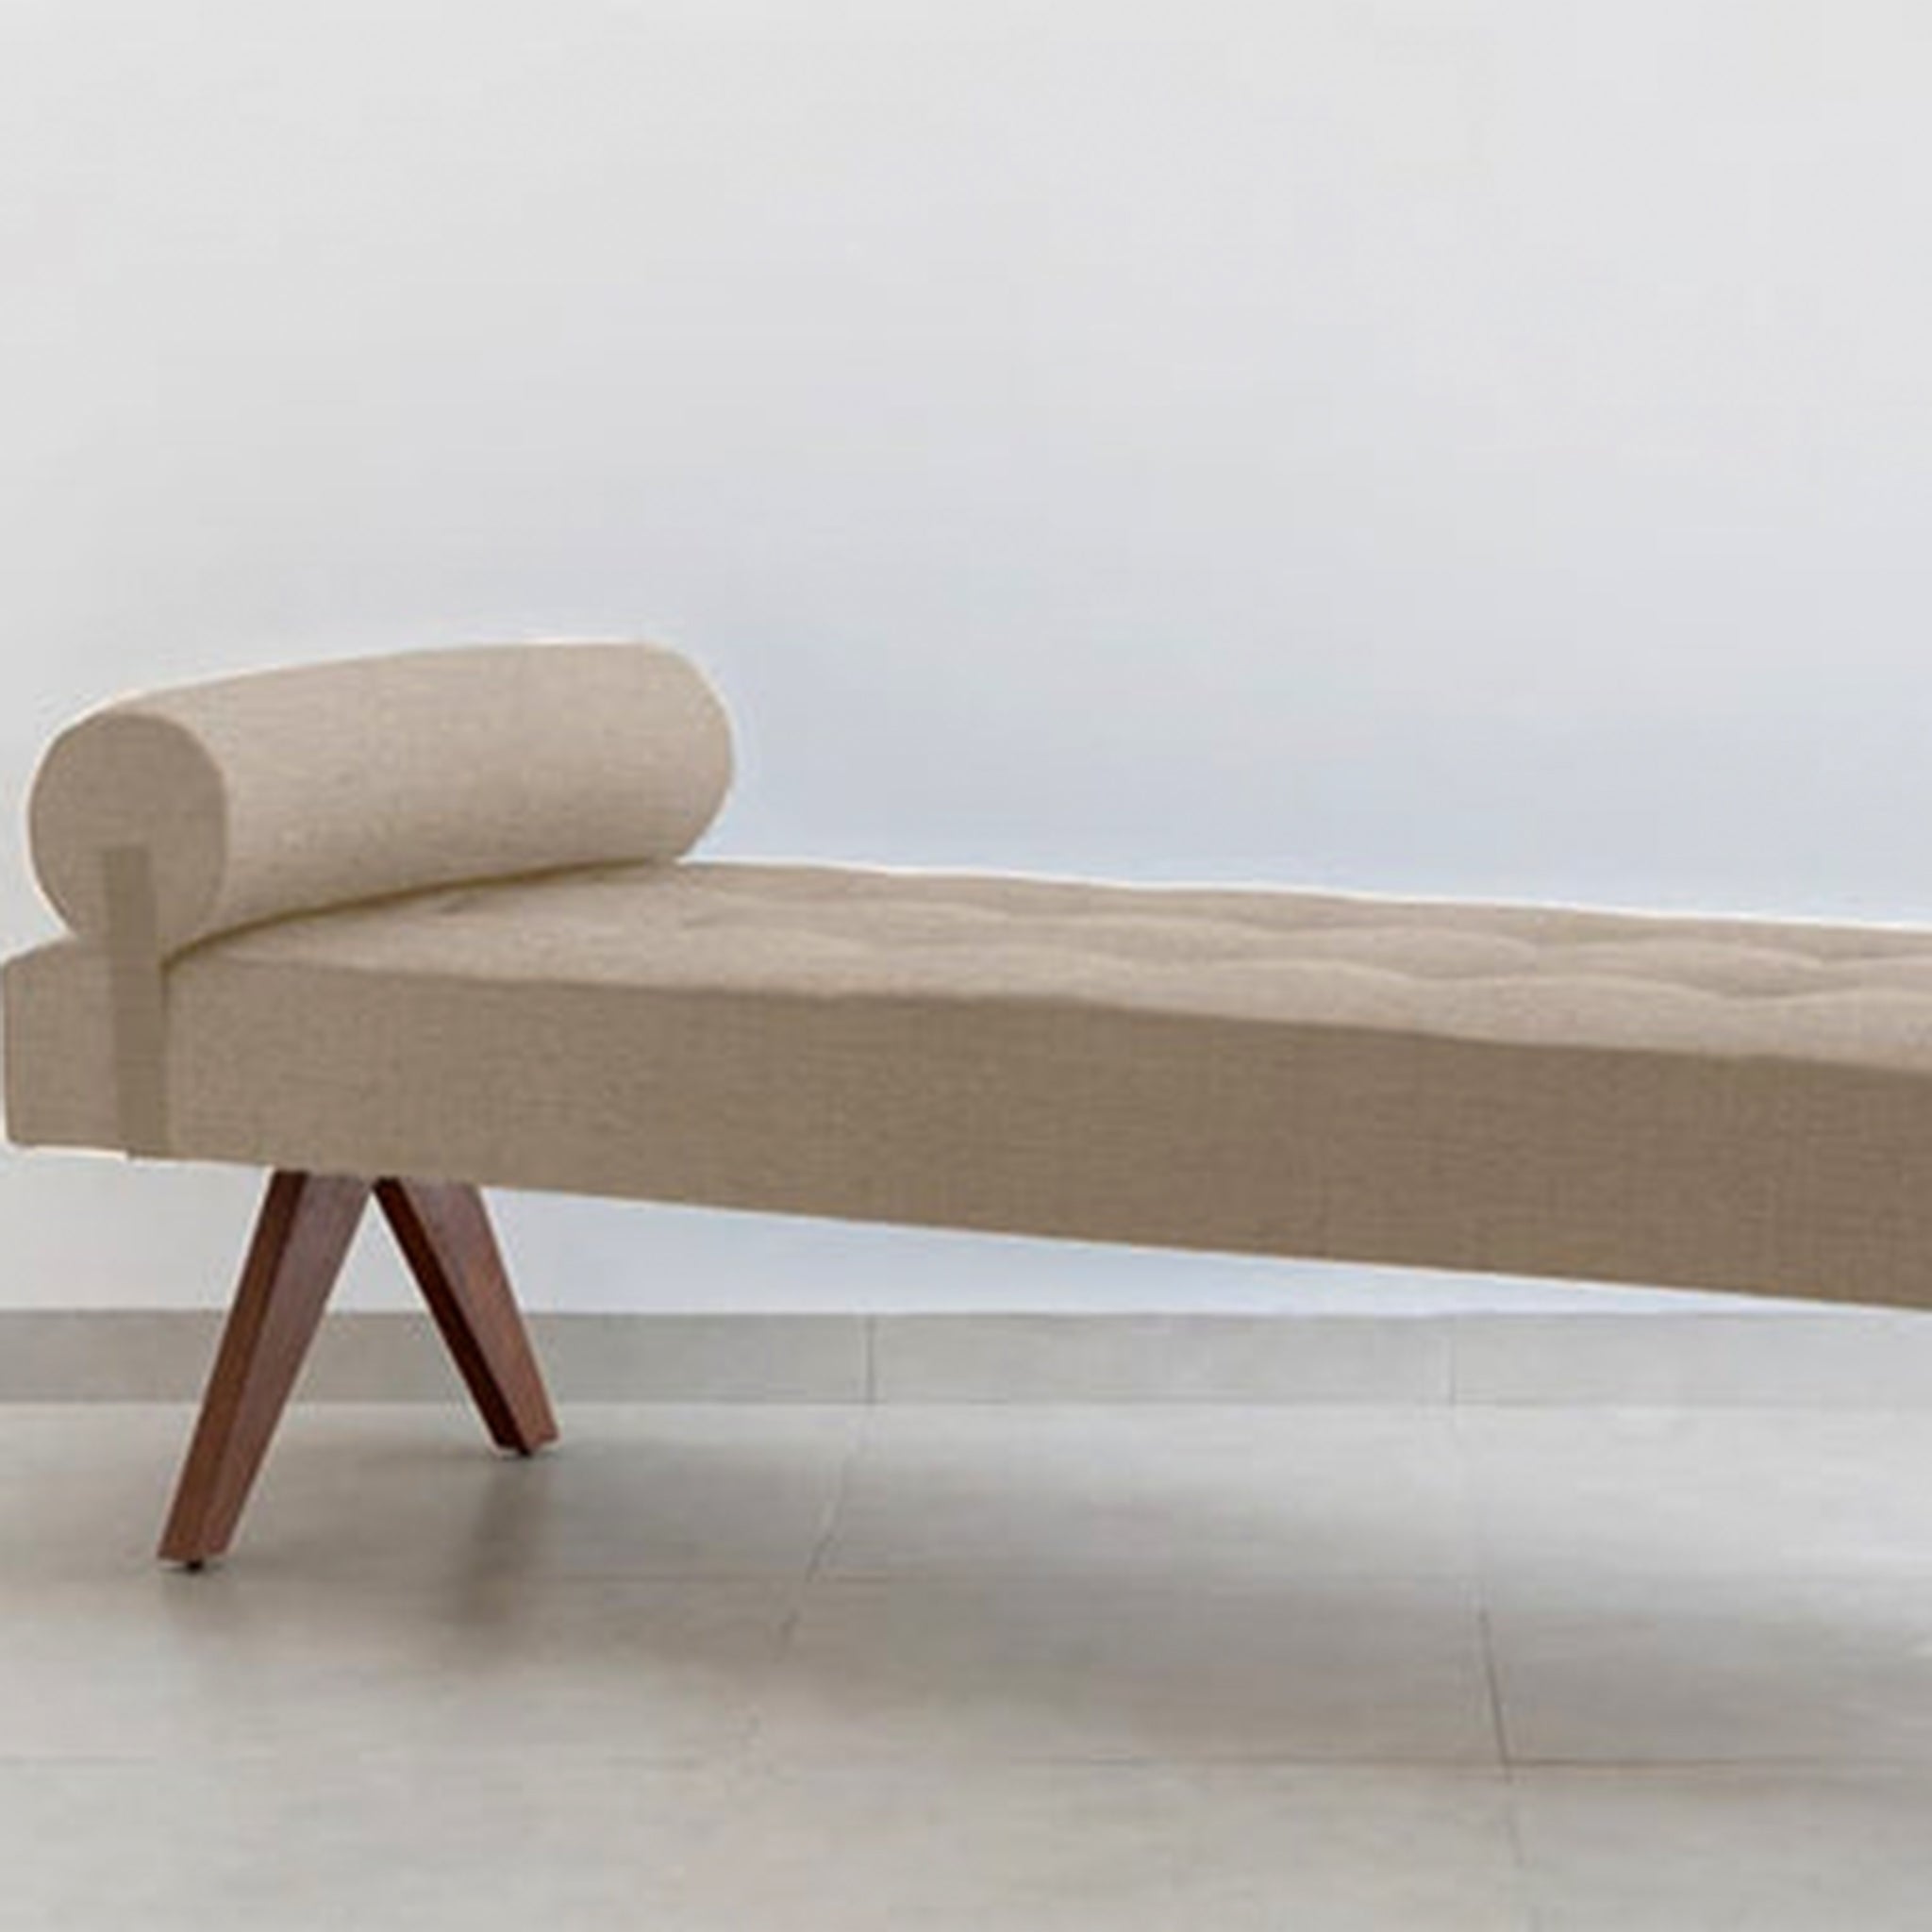 The Jack Daybed with a chic bolster cushion